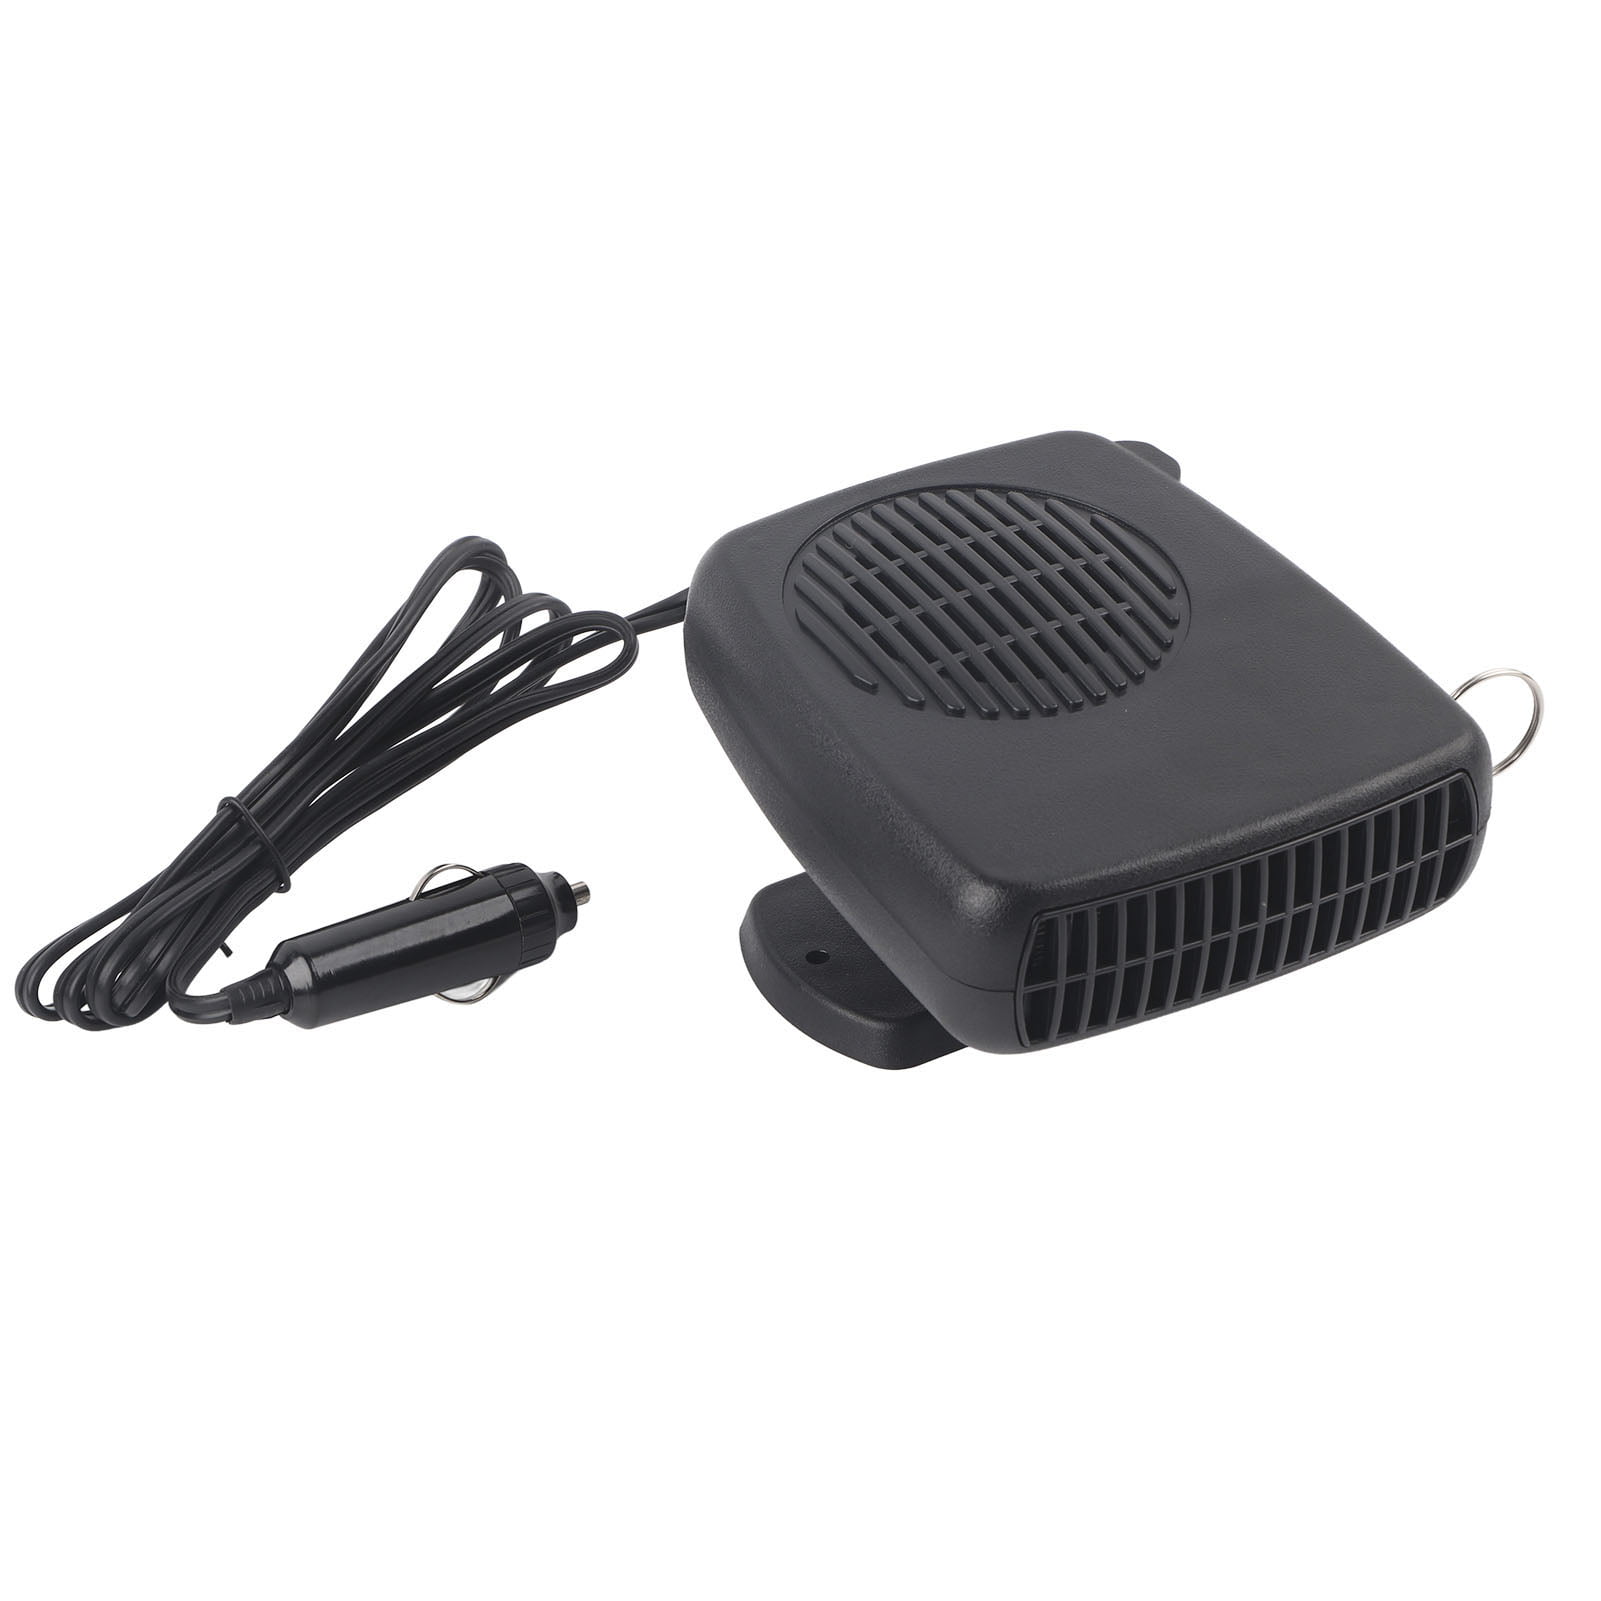 Qiilu 12V 150W Portable Car Fast Heating Windshield Defroster Demister 2 in 1 Heating Cooling Fan 